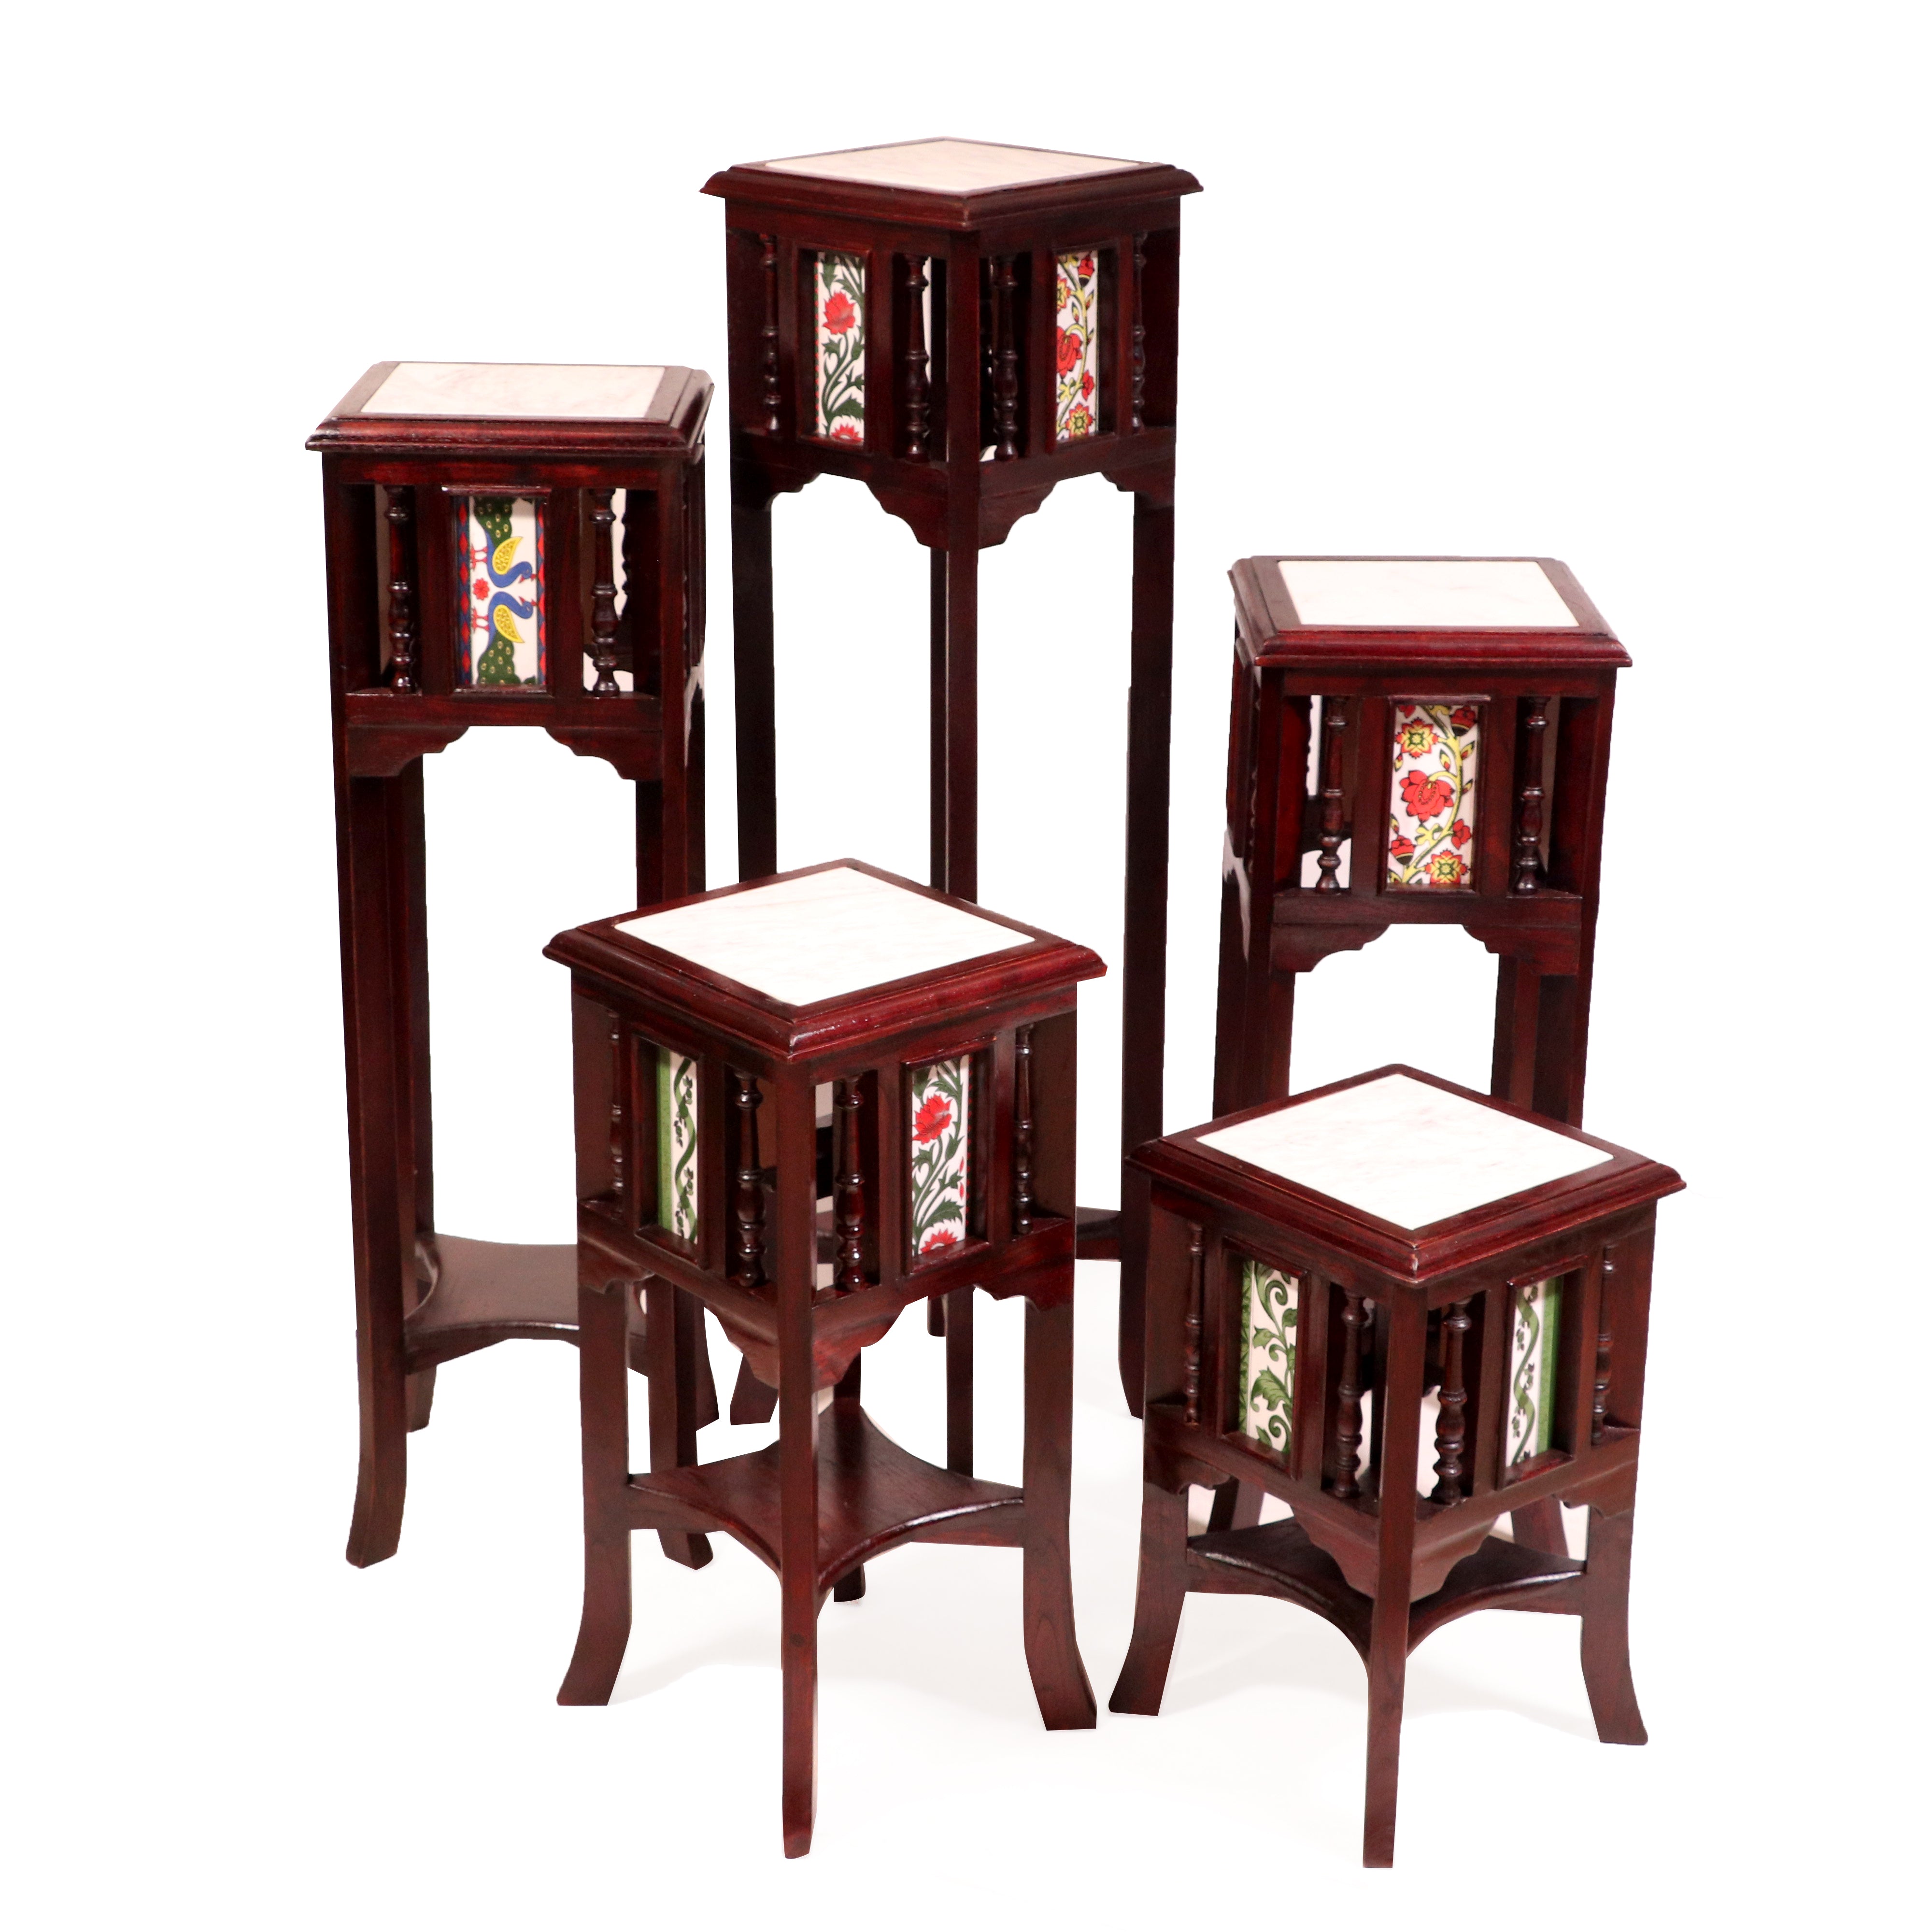 Teak ceramic tile end table with marble top Set of 5 End Table